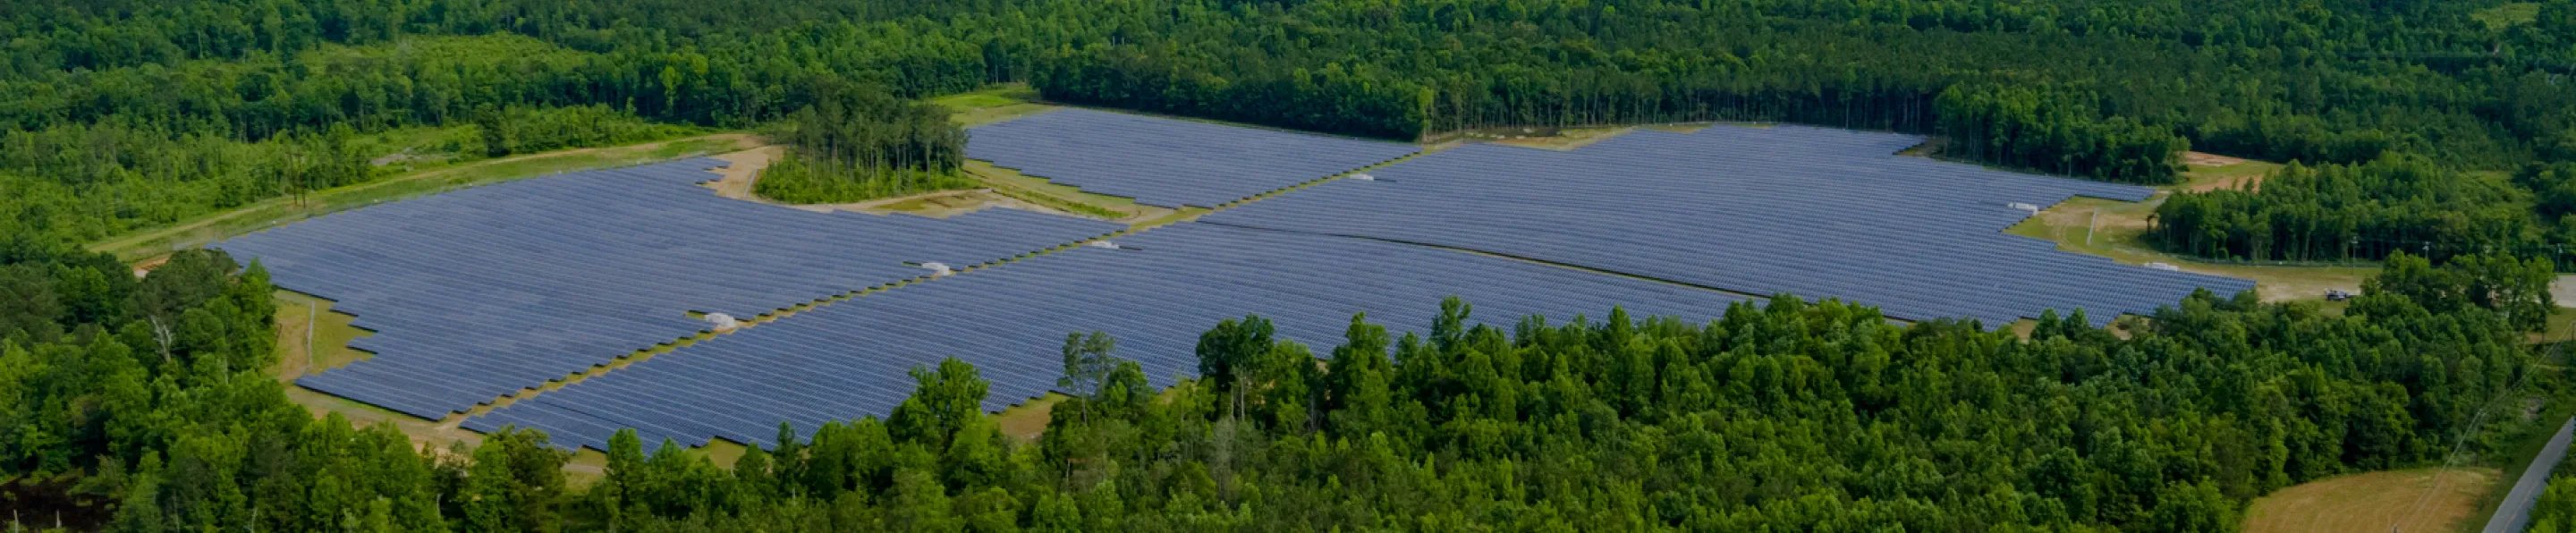 Image of a solar panel field in the middle of a forest.